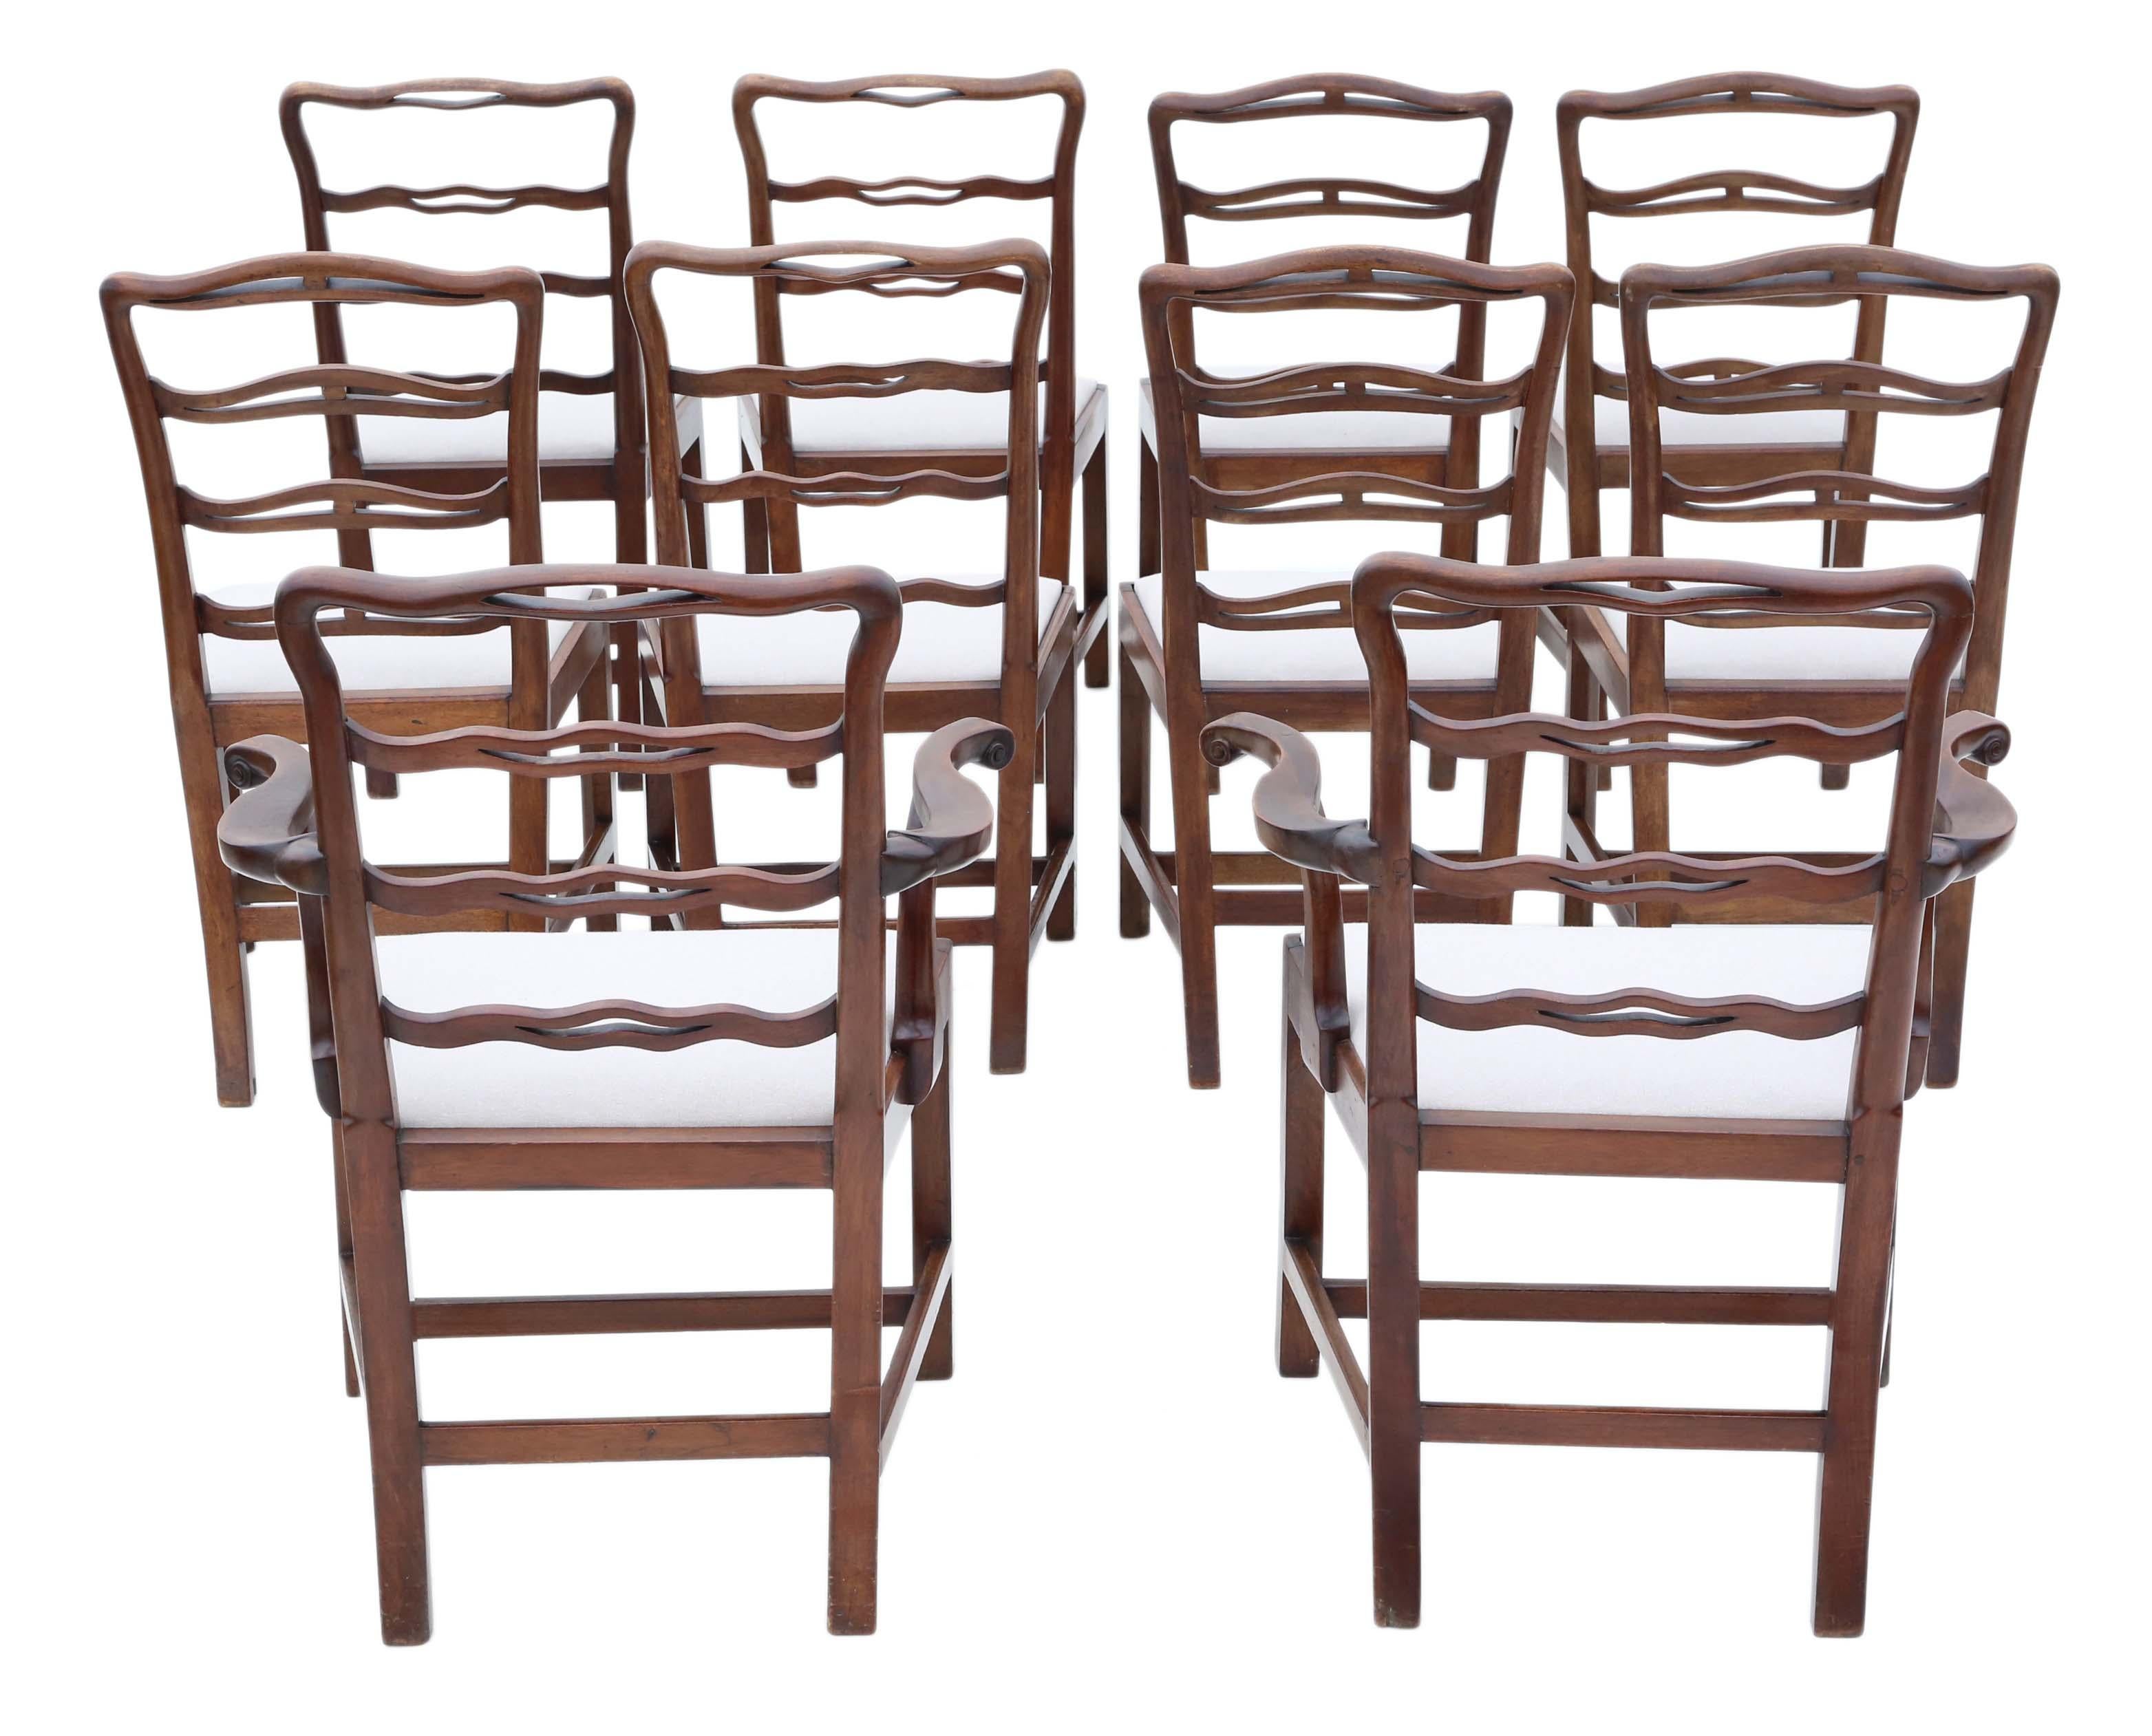 Antique fine quality matched set of 10 (8+2) carved mahogany Georgian C1825 dining chairs ribbon back.

No loose joints and no woodworm.

Professionally reupholstered drop in seats. Wide generous seats.

Overall maximum dimensions:

Carver